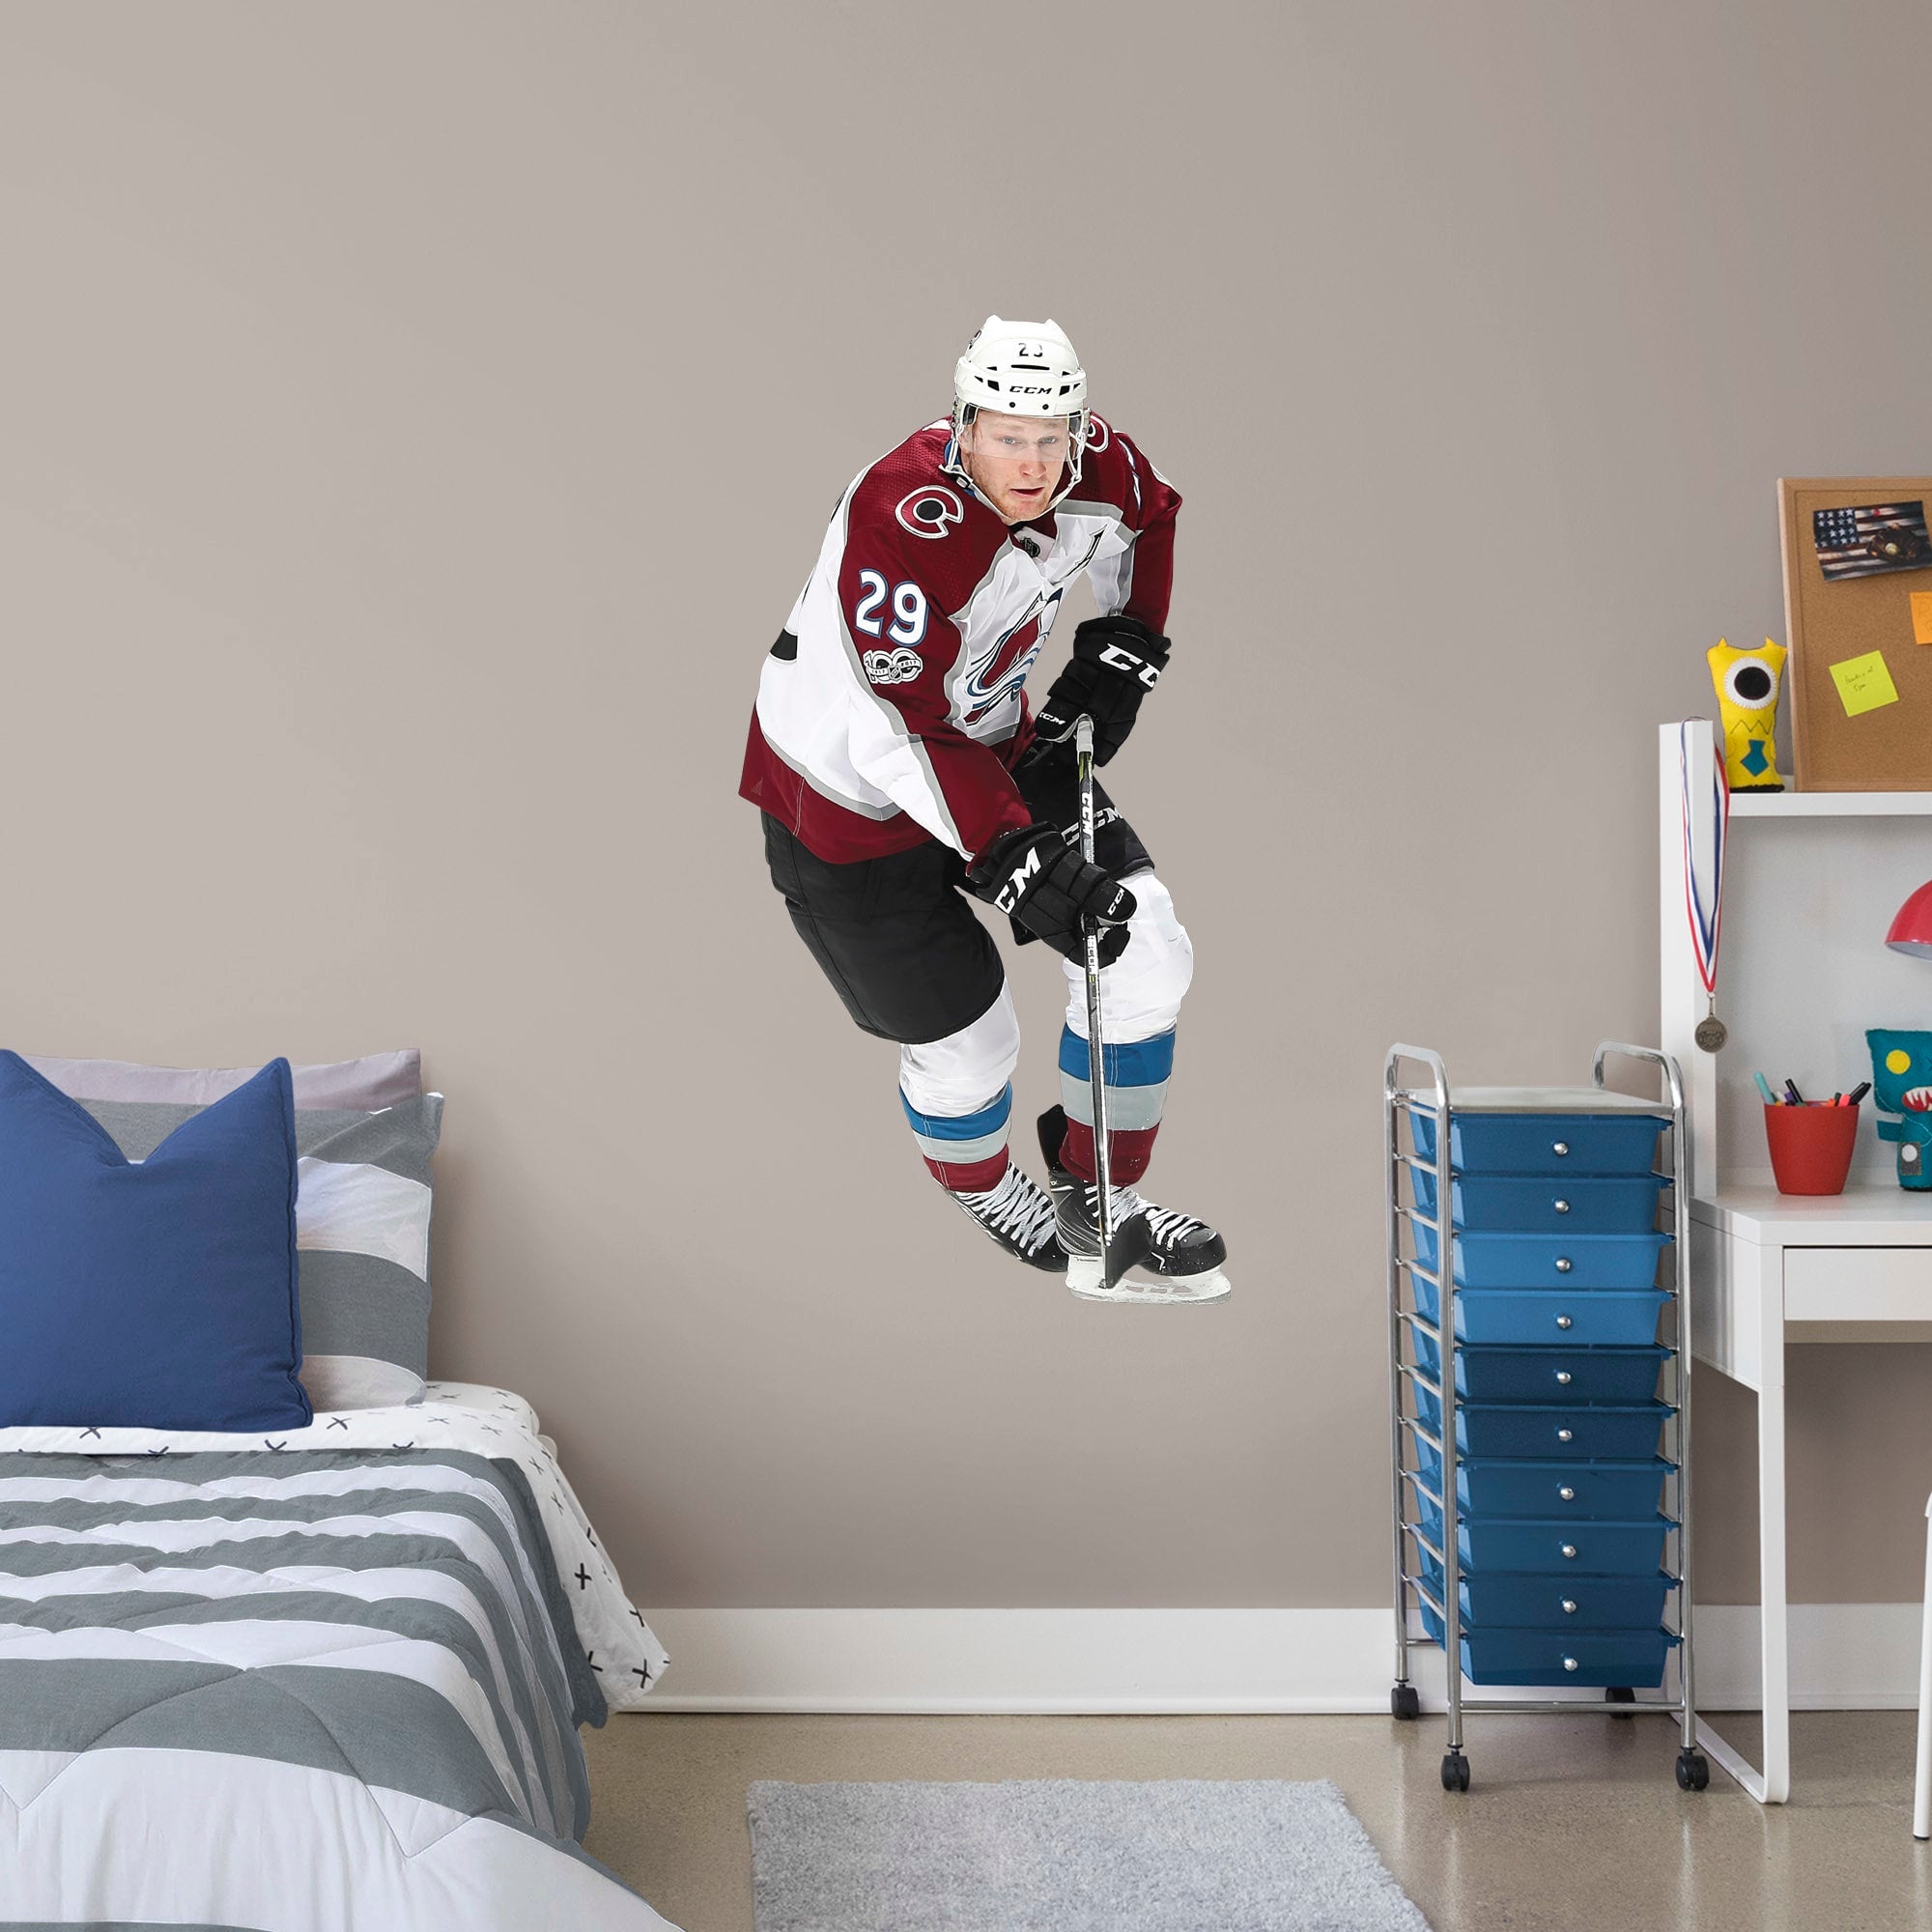 Nathan MacKinnon for Colorado Avalanche - Officially Licensed NHL Removable Wall Decal Giant Athlete + 2 Decals (25"W x 51"H) by